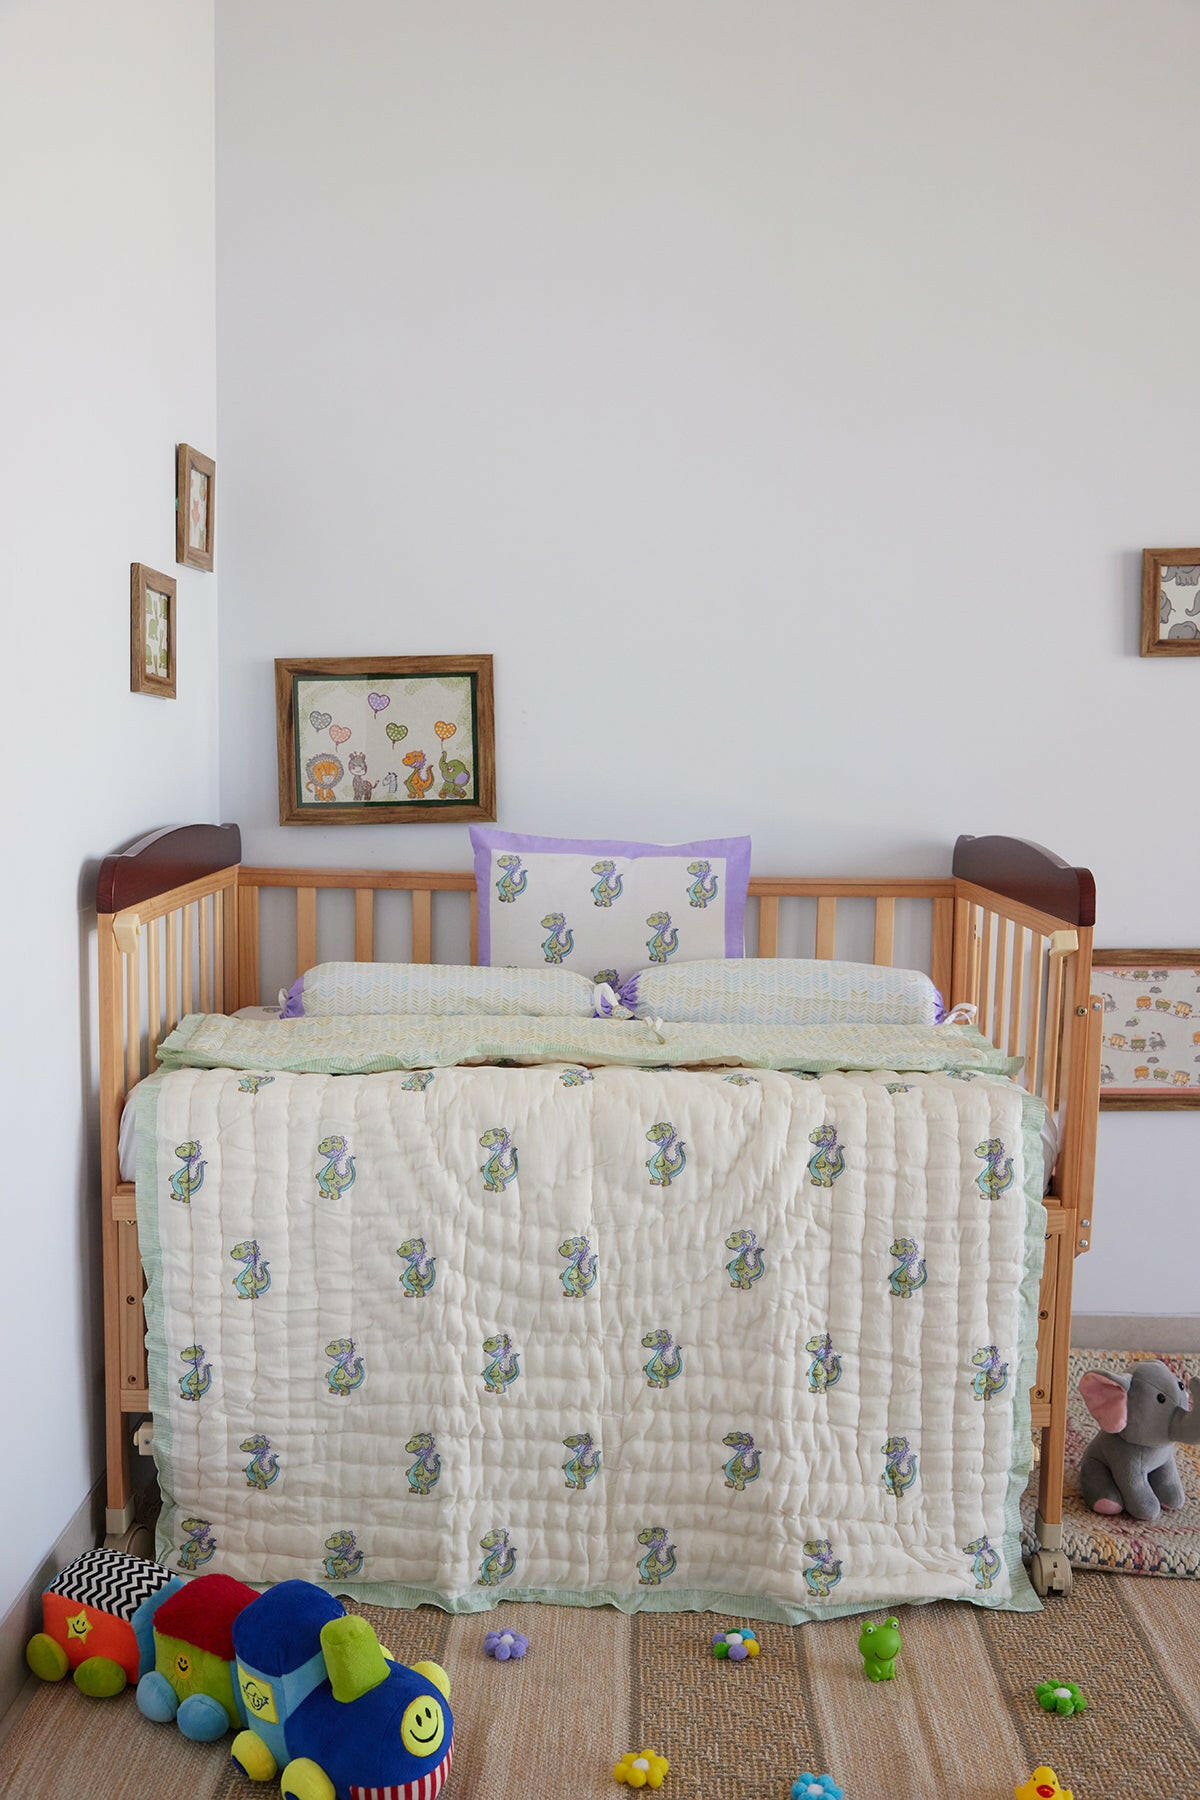 The Little Dino Cot Set